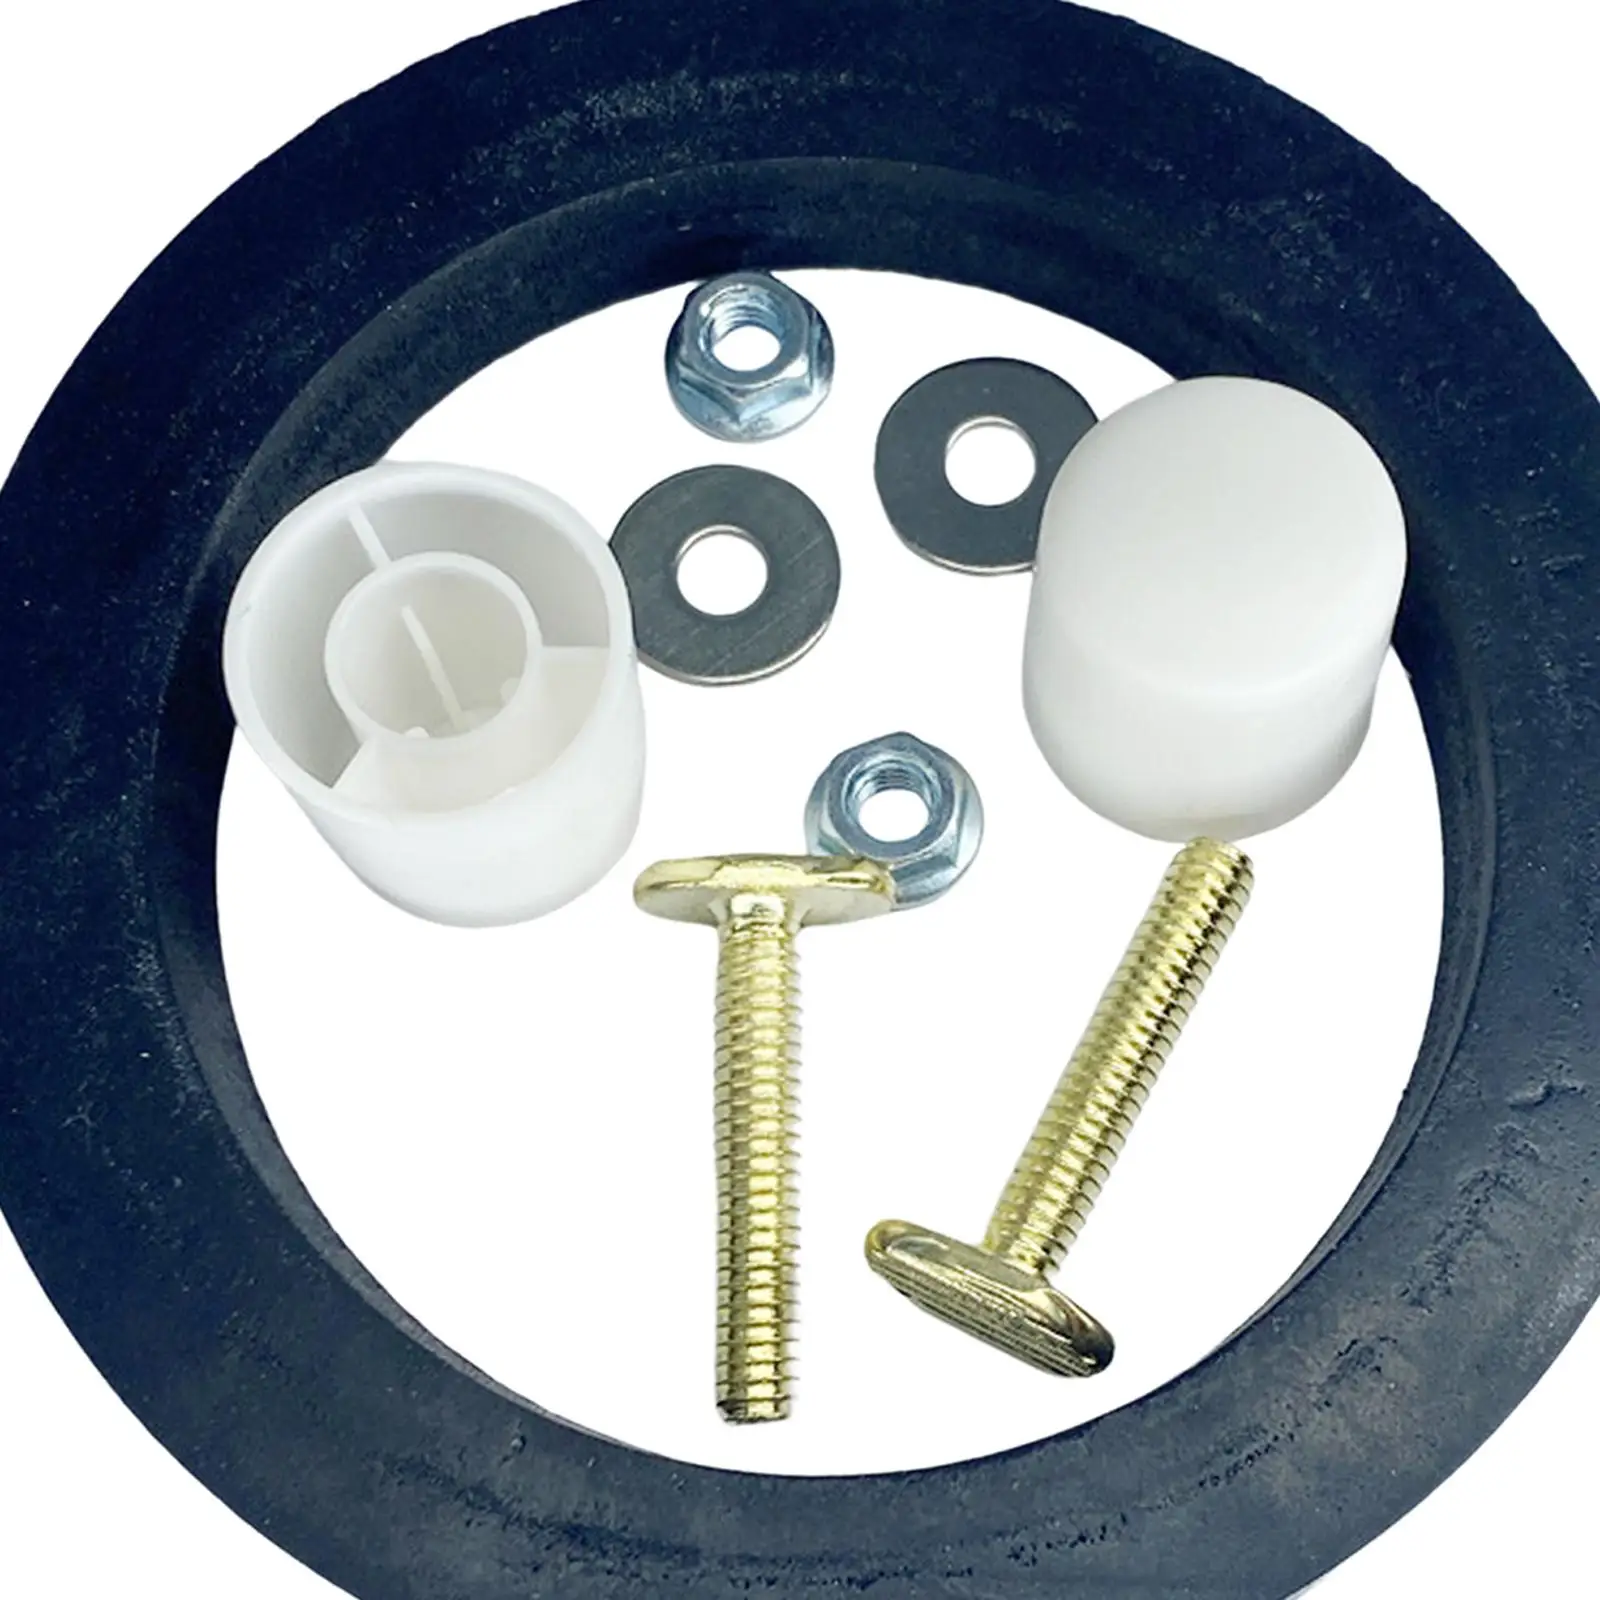 RV Toilet Parts Seal Kit for 300, 310, 320 Series Accessory Lightweight